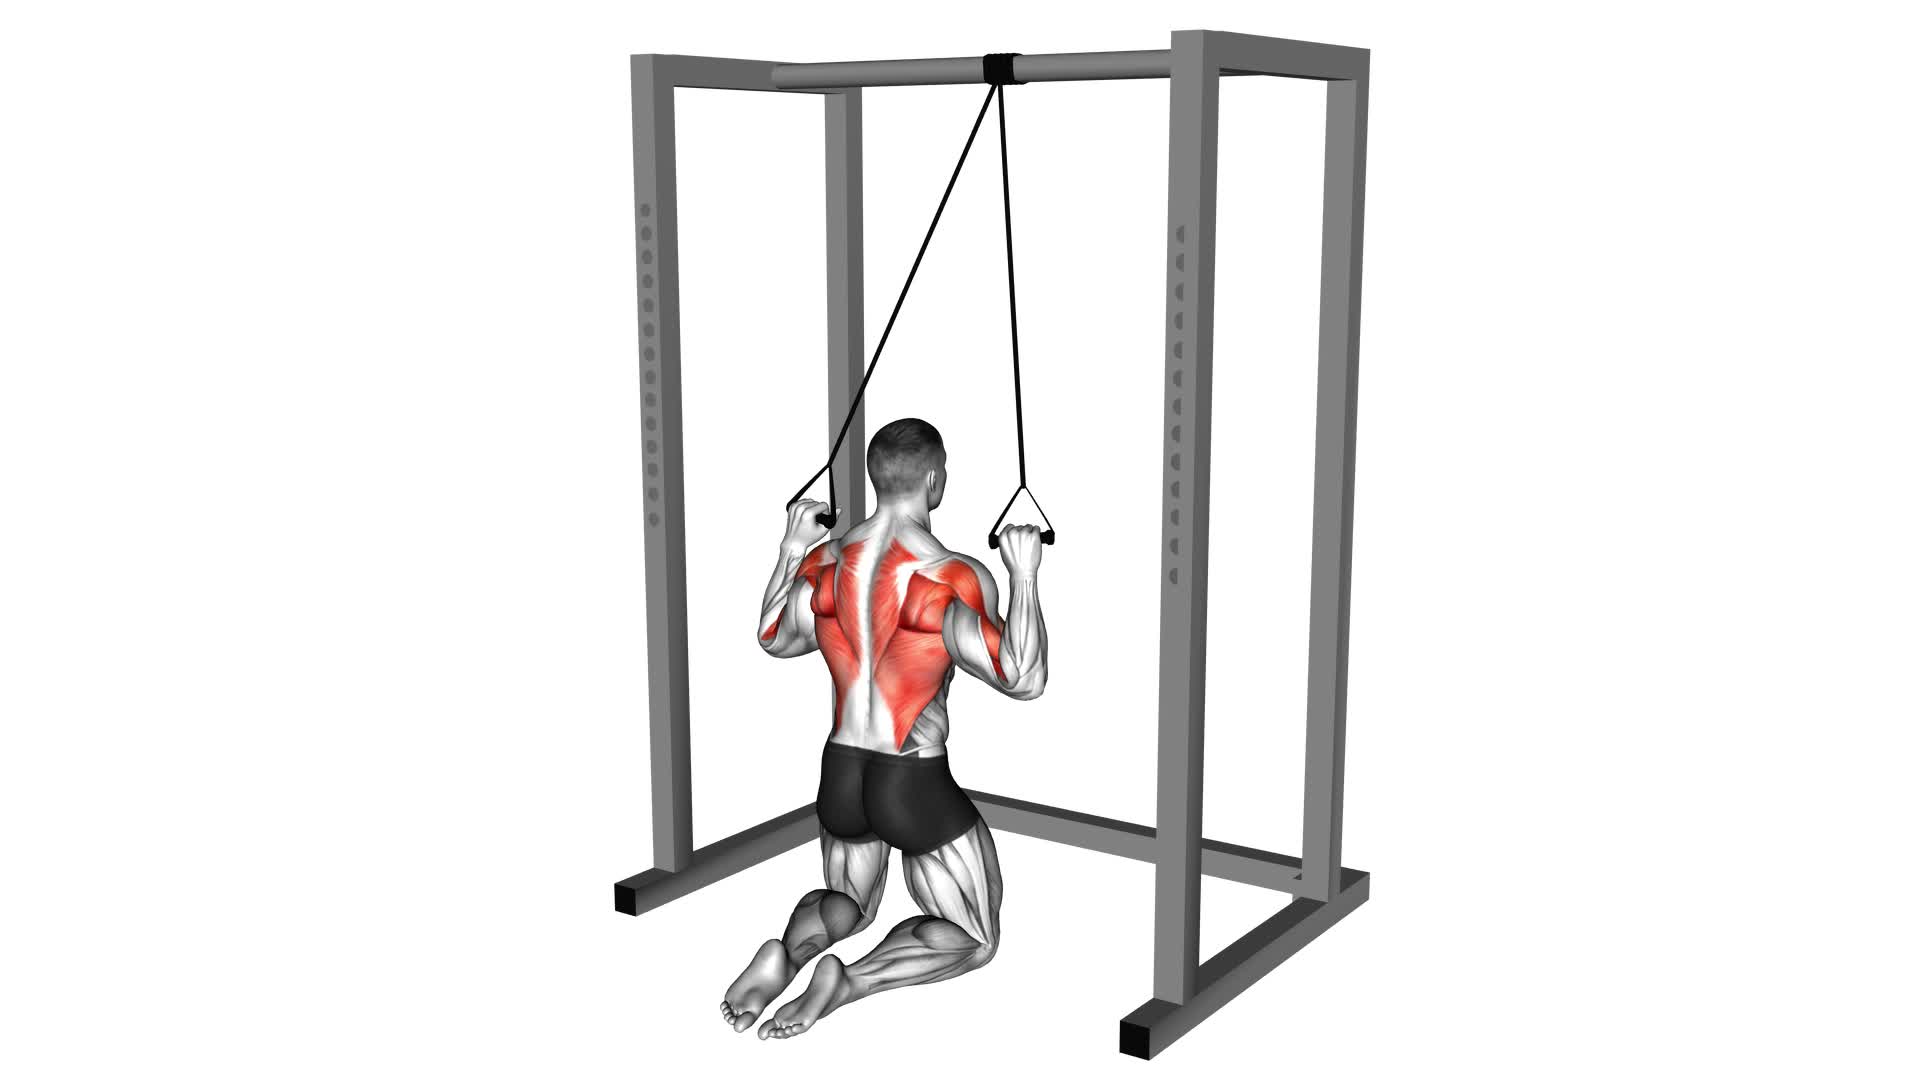 Band Knelling Lat Pulldown - Video Exercise Guide & Tips